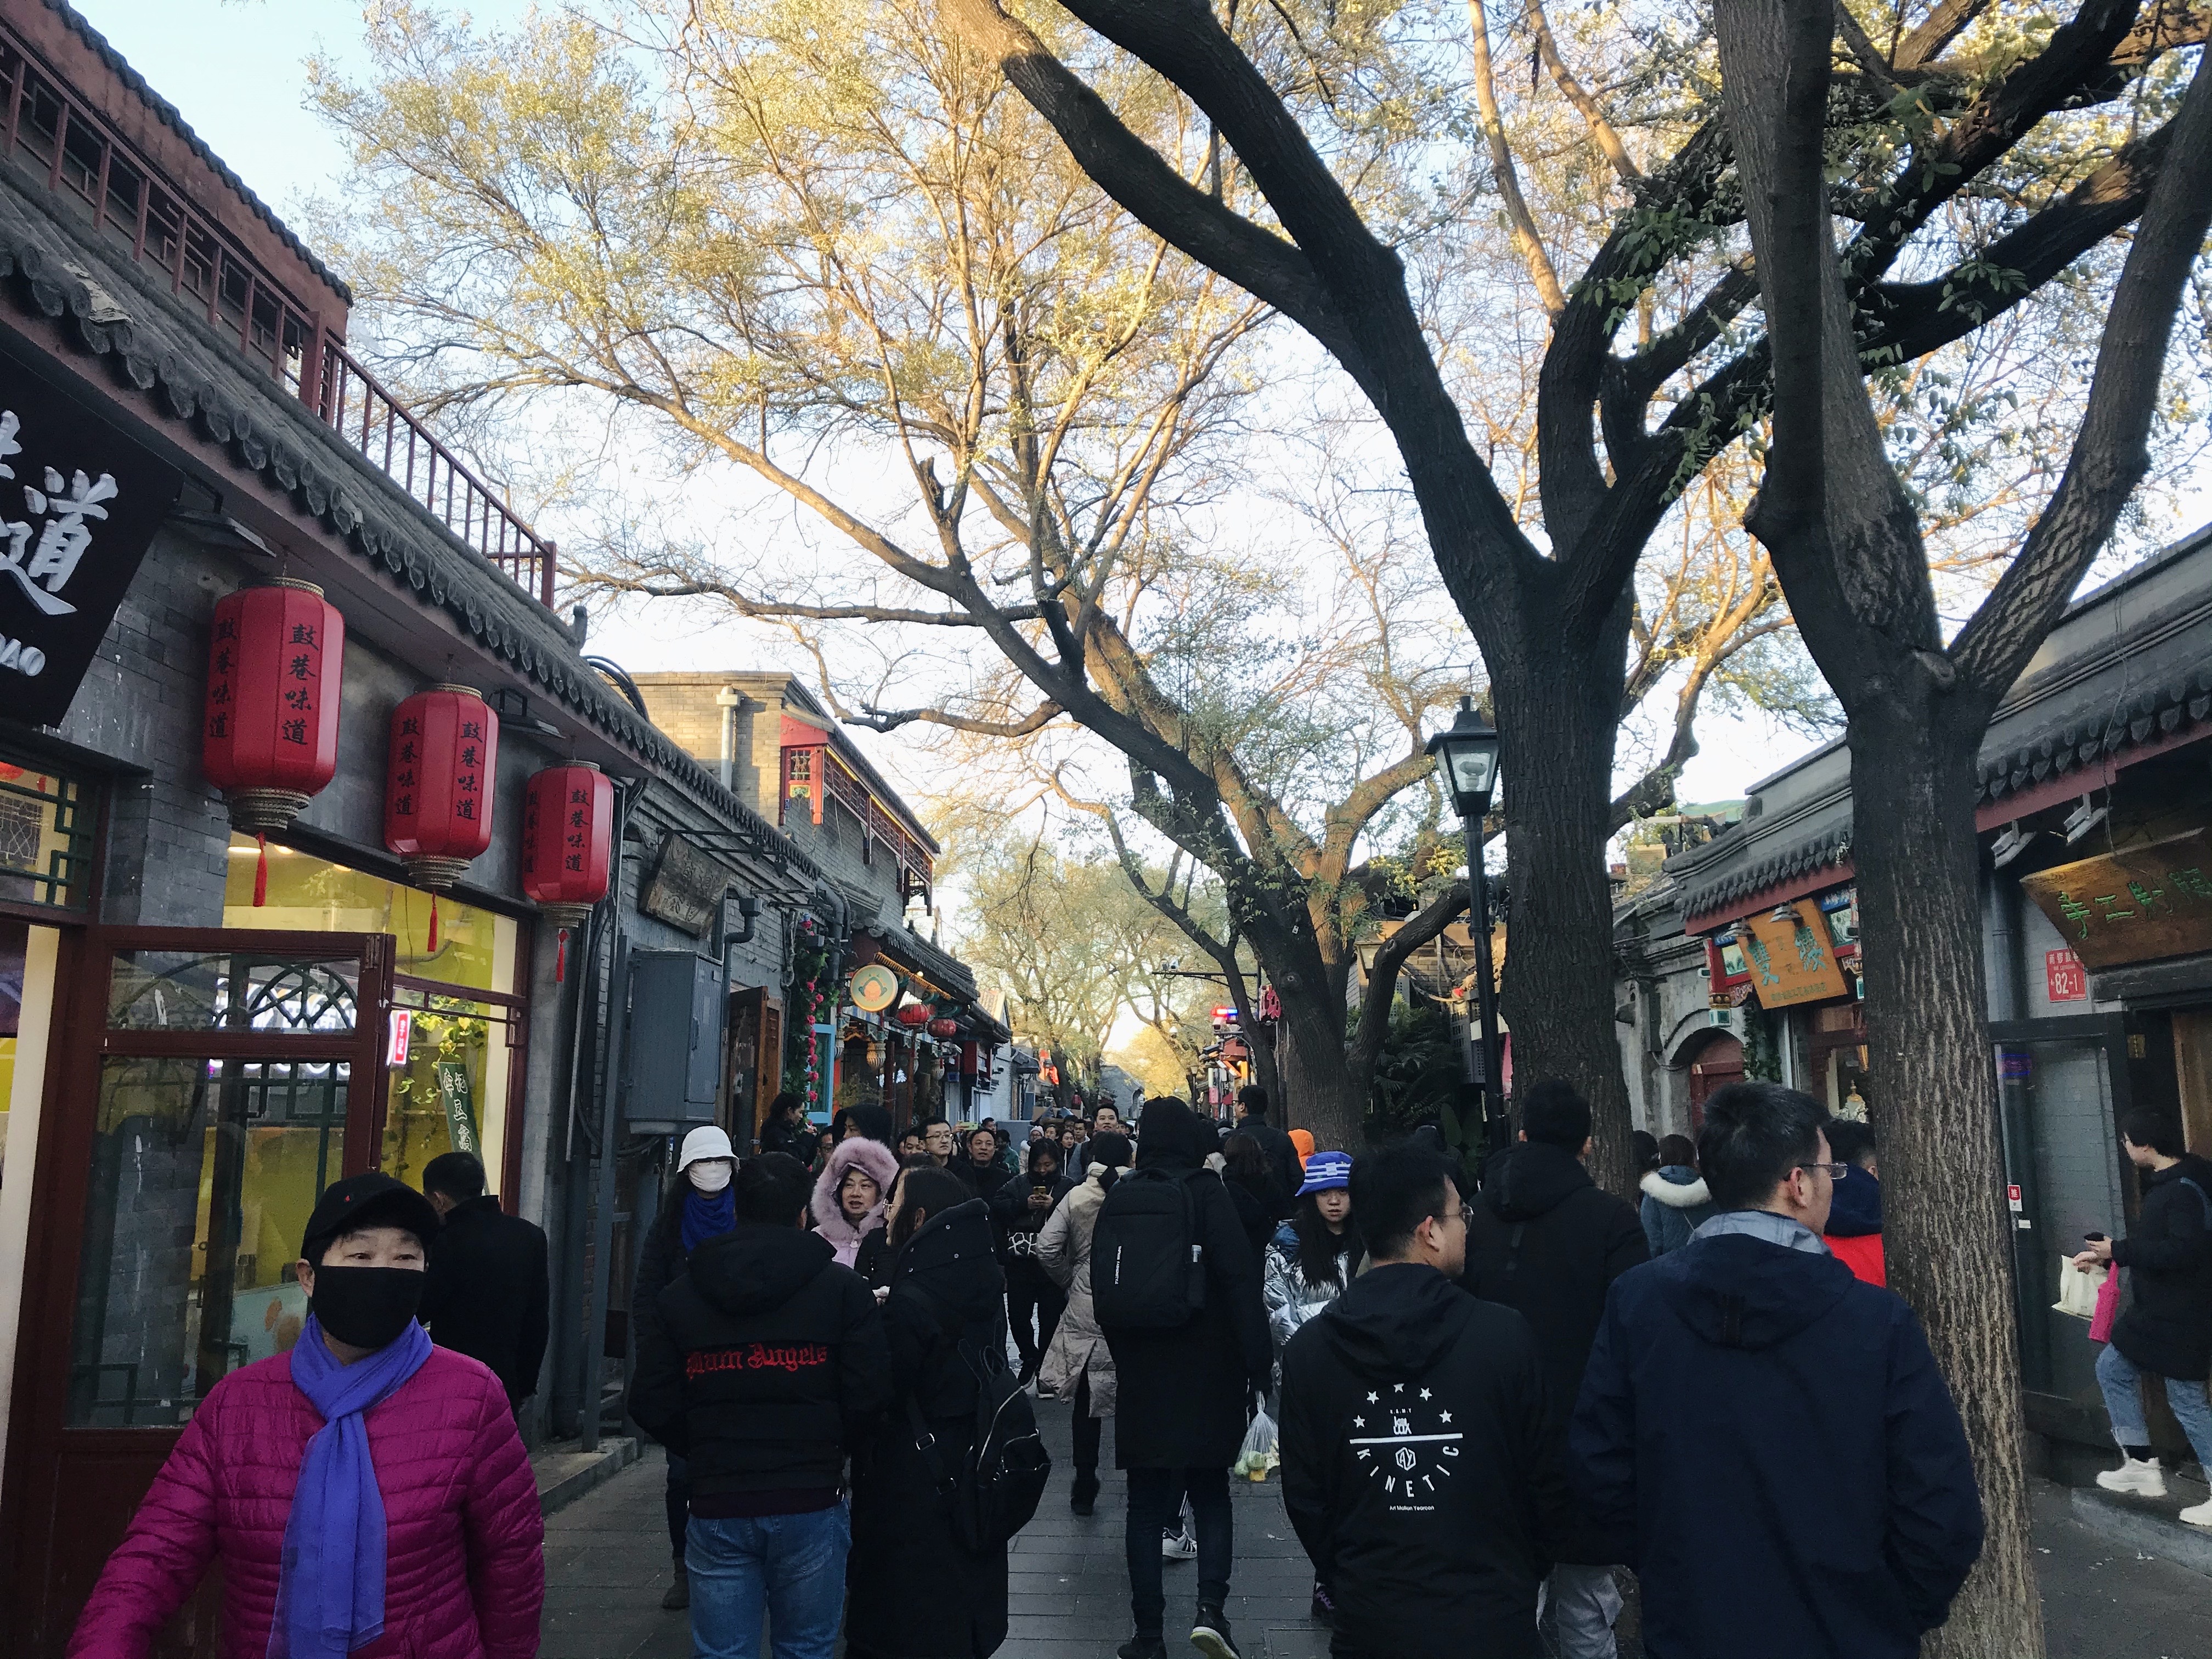 People walking up and down Hutong alley